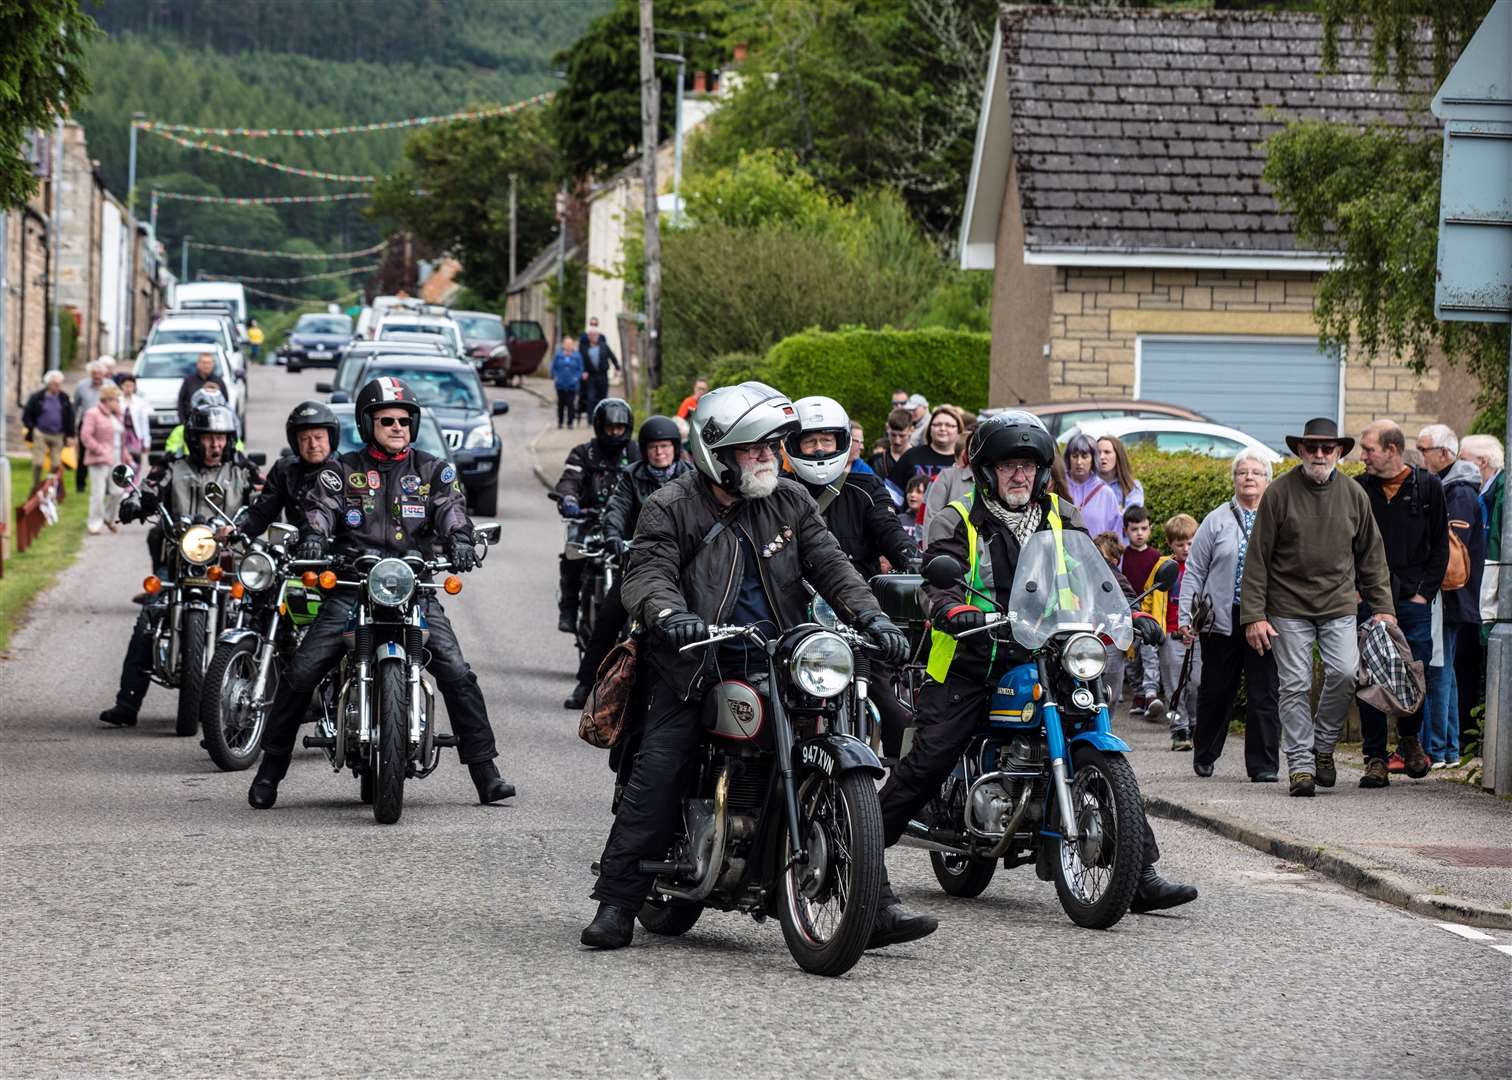 Highland Classic Motorcycle Club took part in the parade. Picture: Nick Gibbons